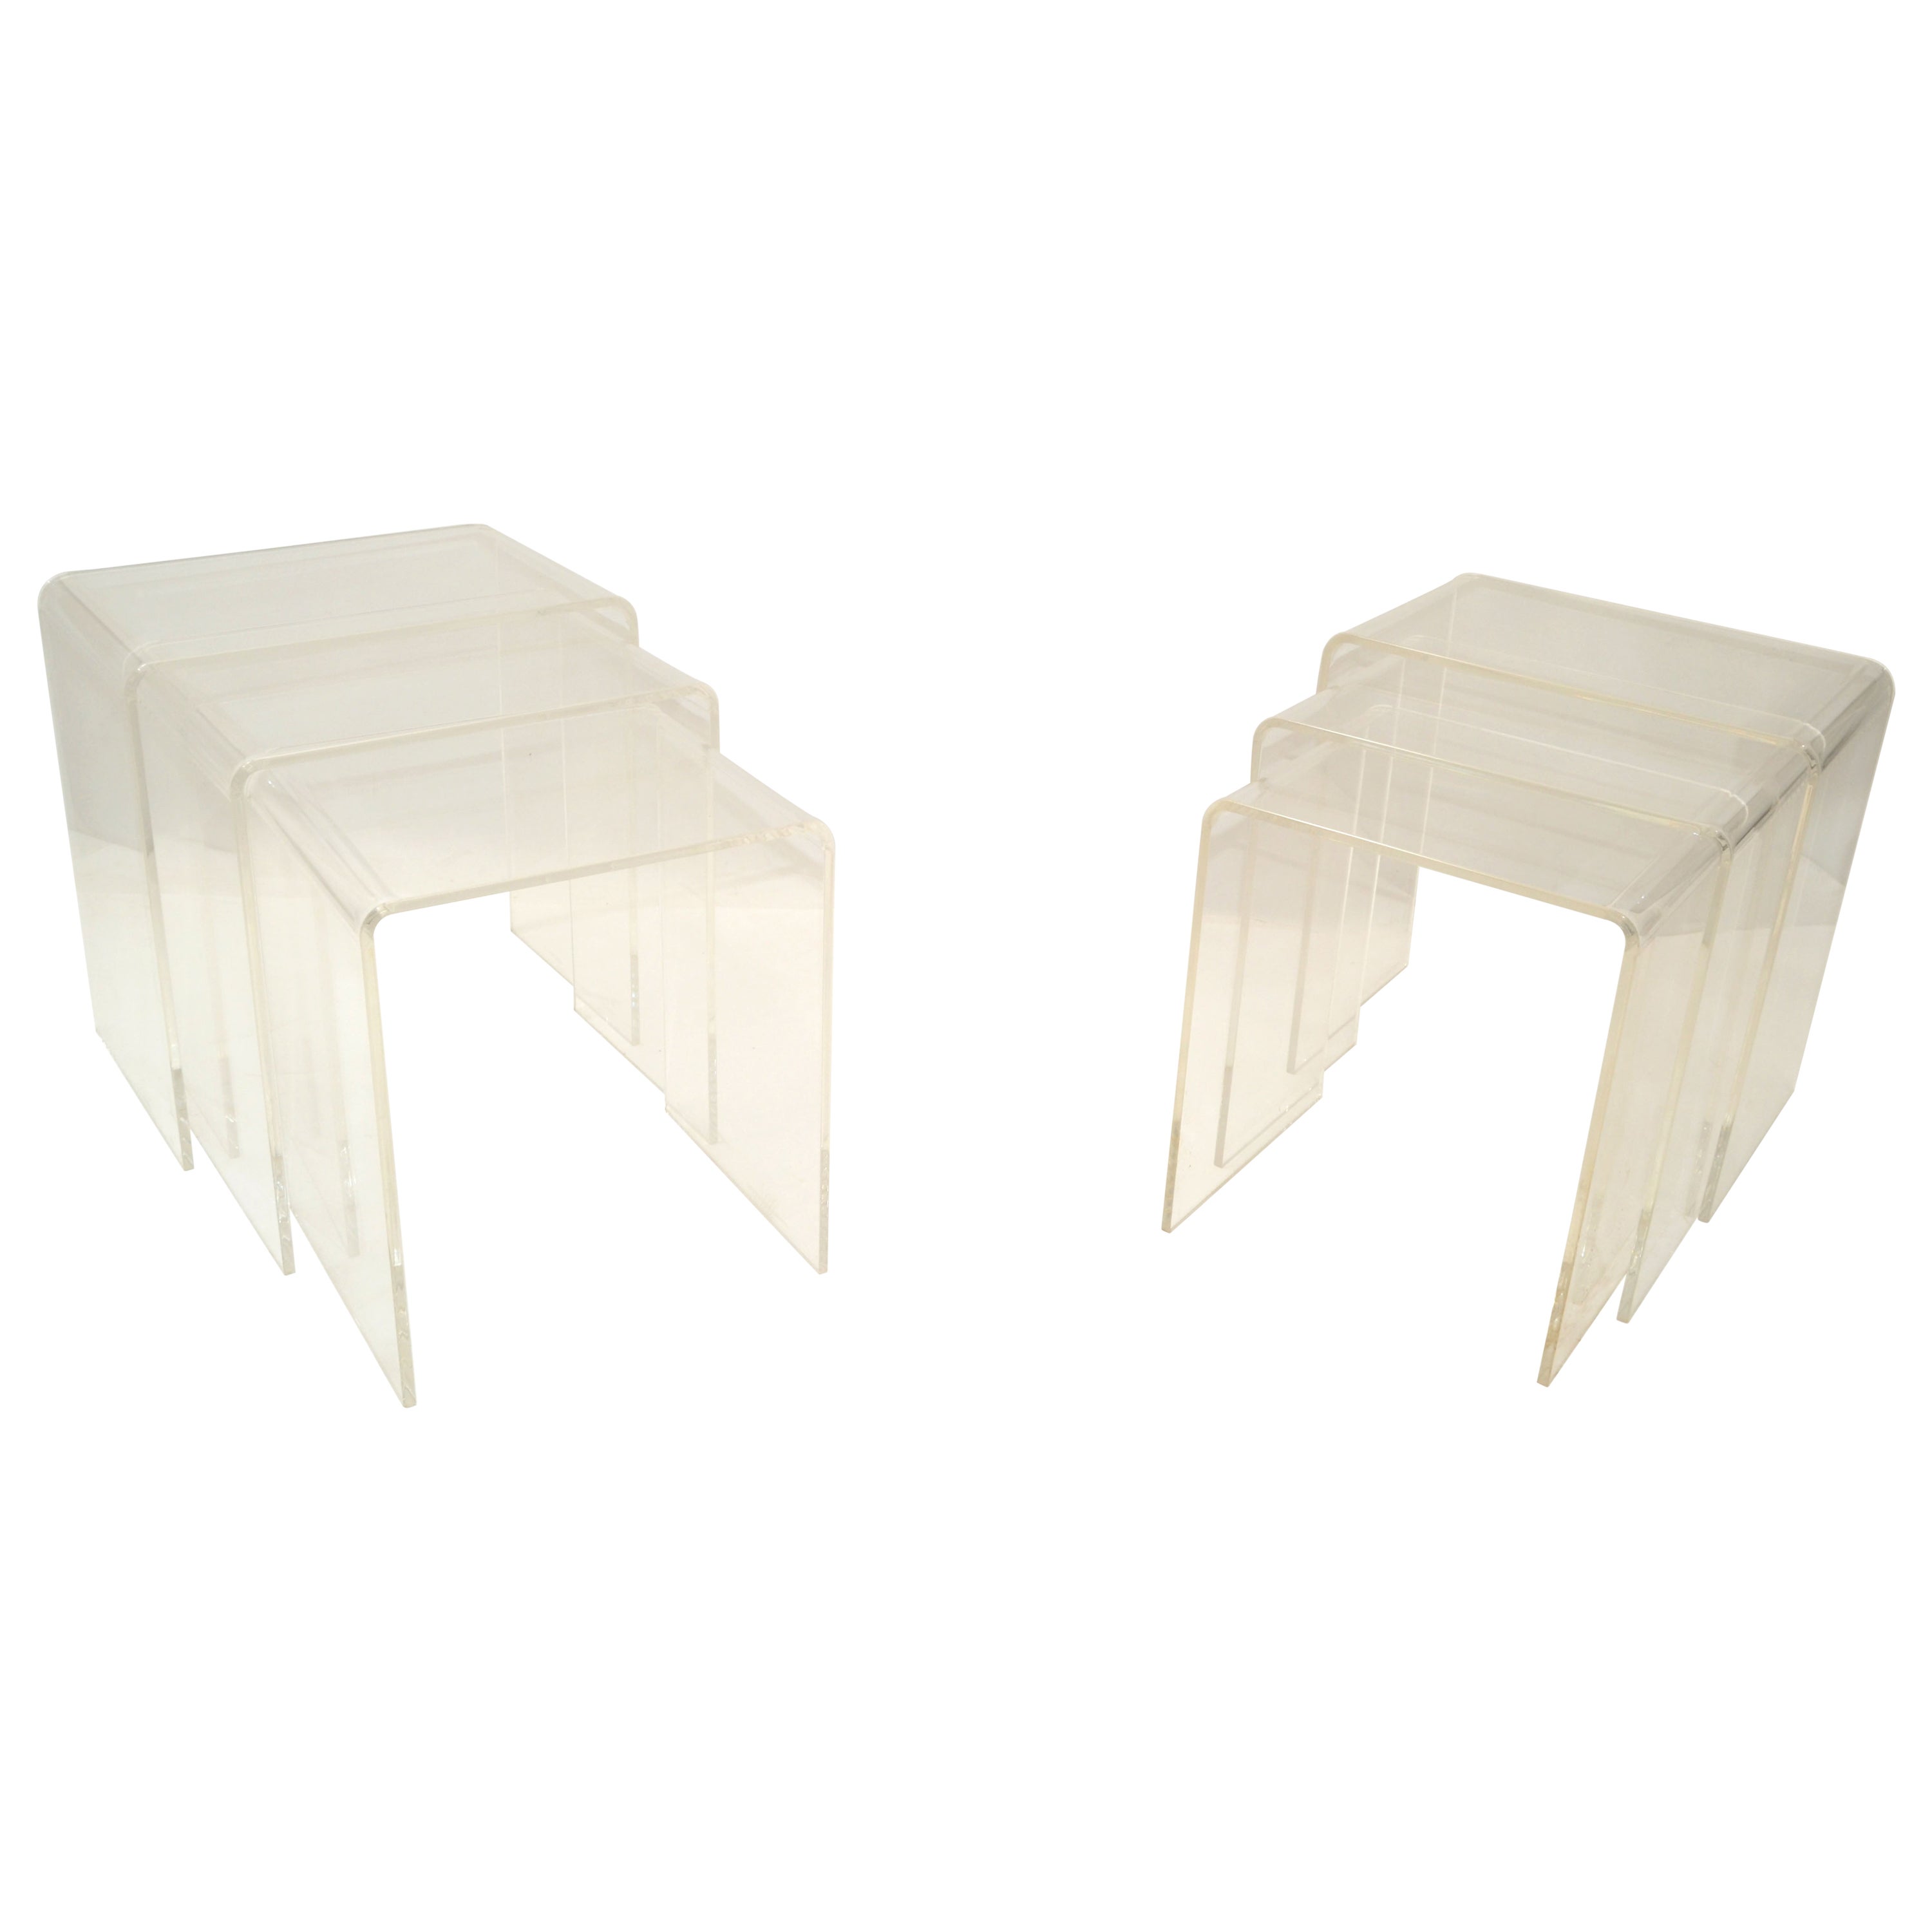 Pair of Lucite Waterfall Nesting Tables / Stacking Tables, Stools, Set of 3 For Sale